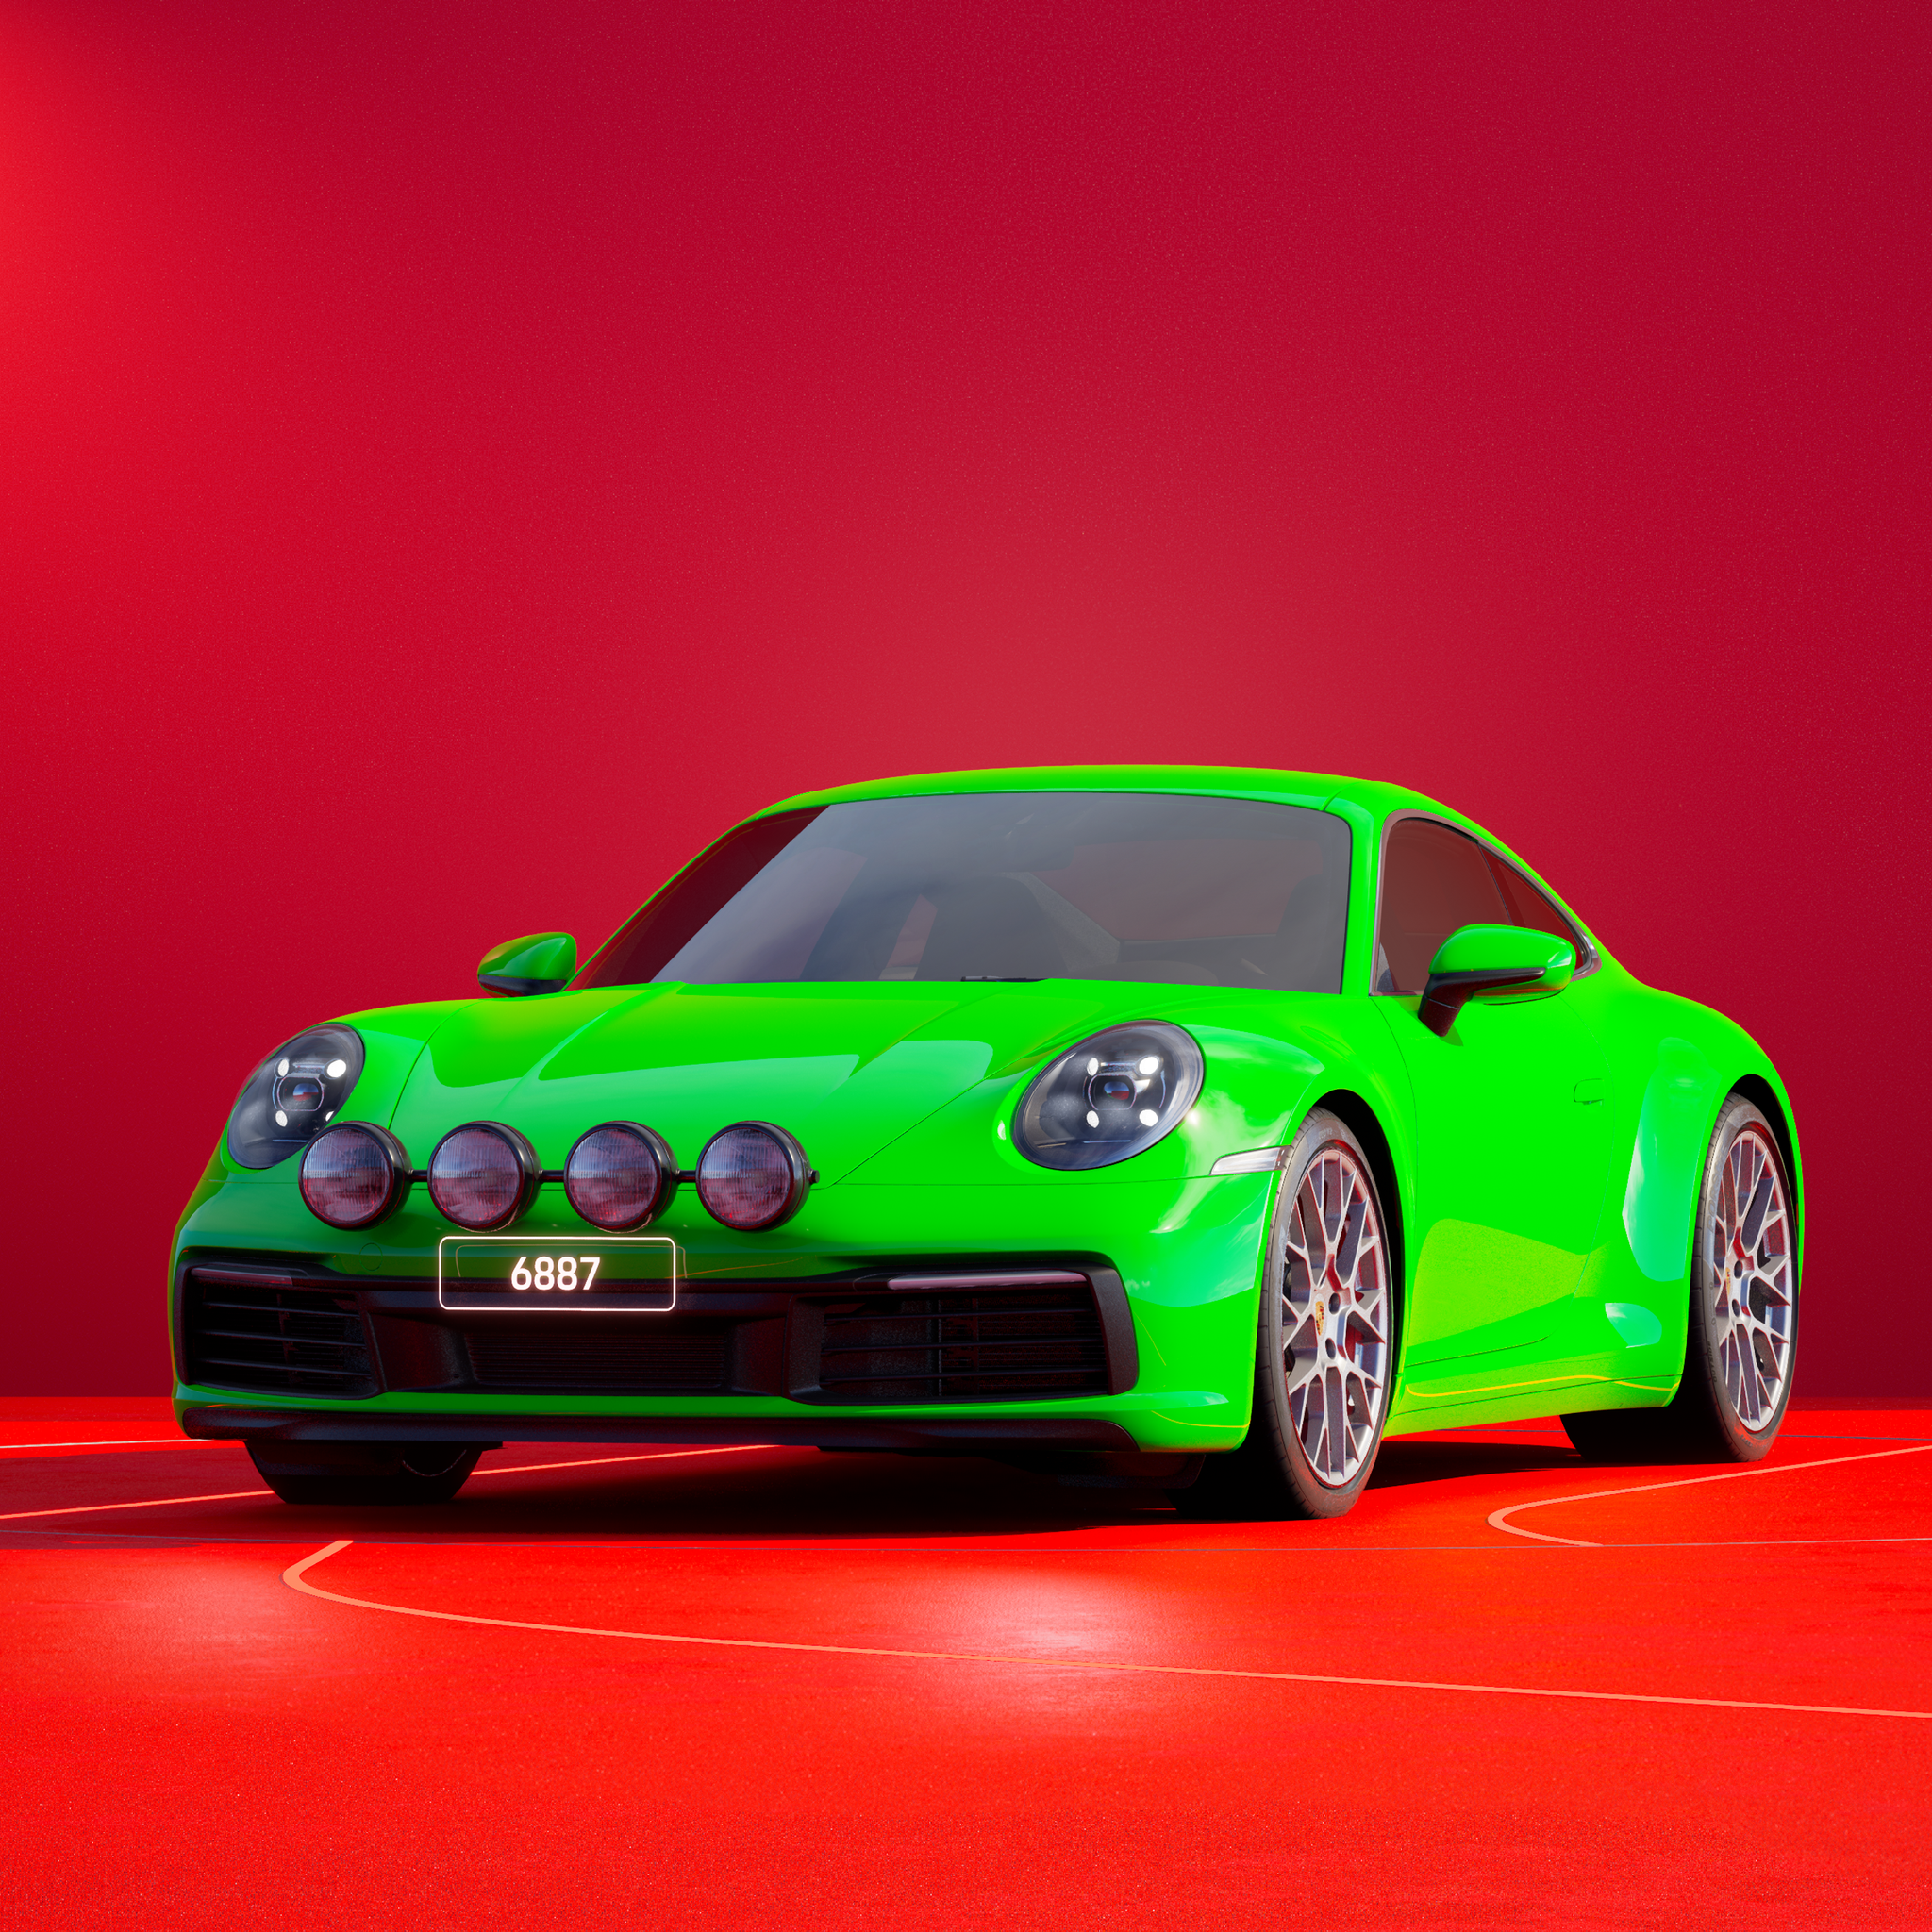 The PORSCHΞ 911 6887 image in phase